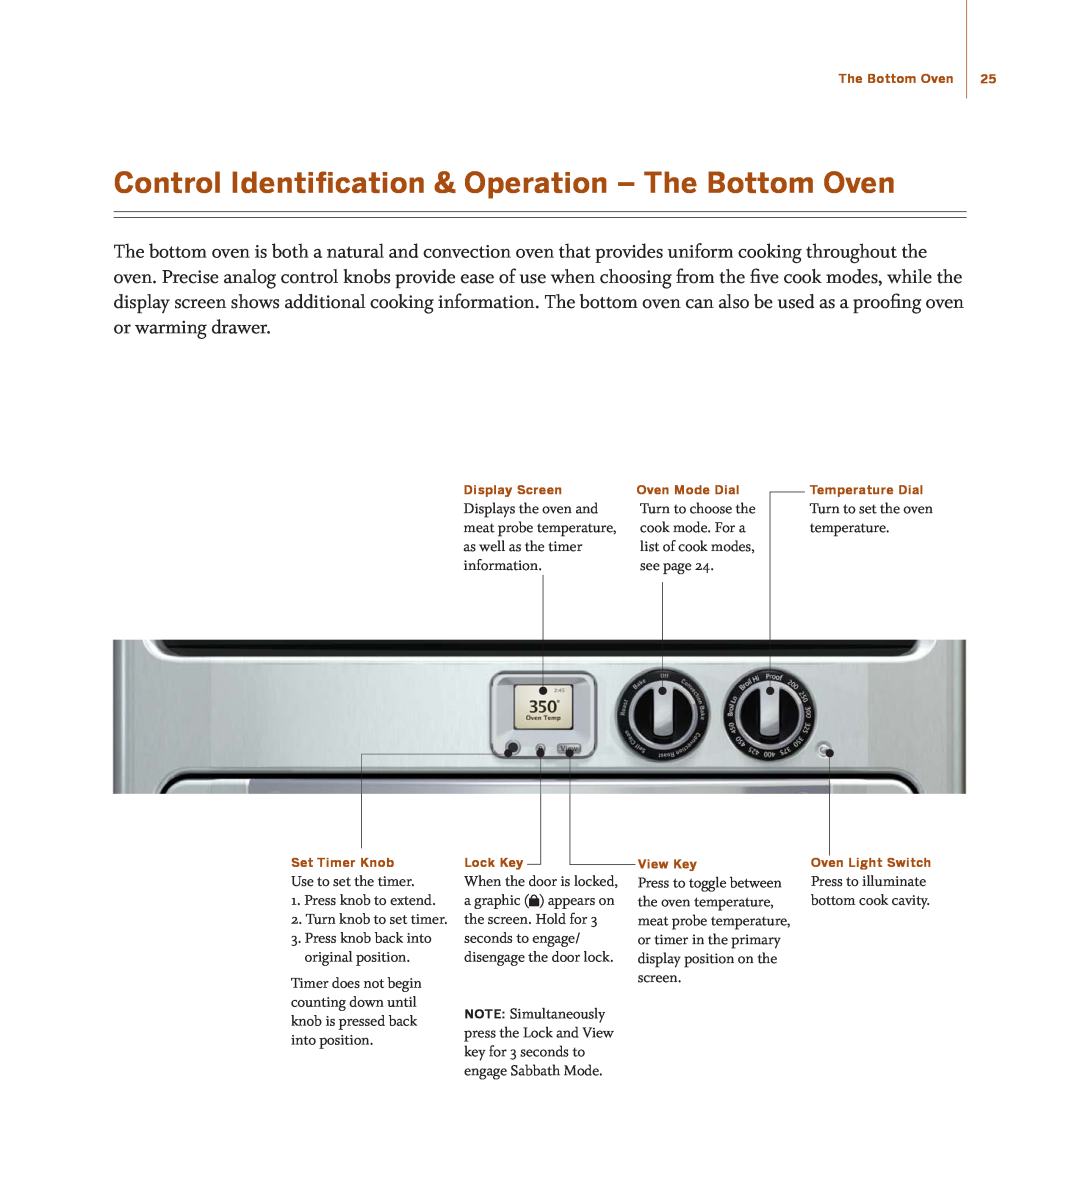 Turbo Chef Technologies TD030*240 Control Identification & Operation - The Bottom Oven, Display Screen, Oven Mode Dial 